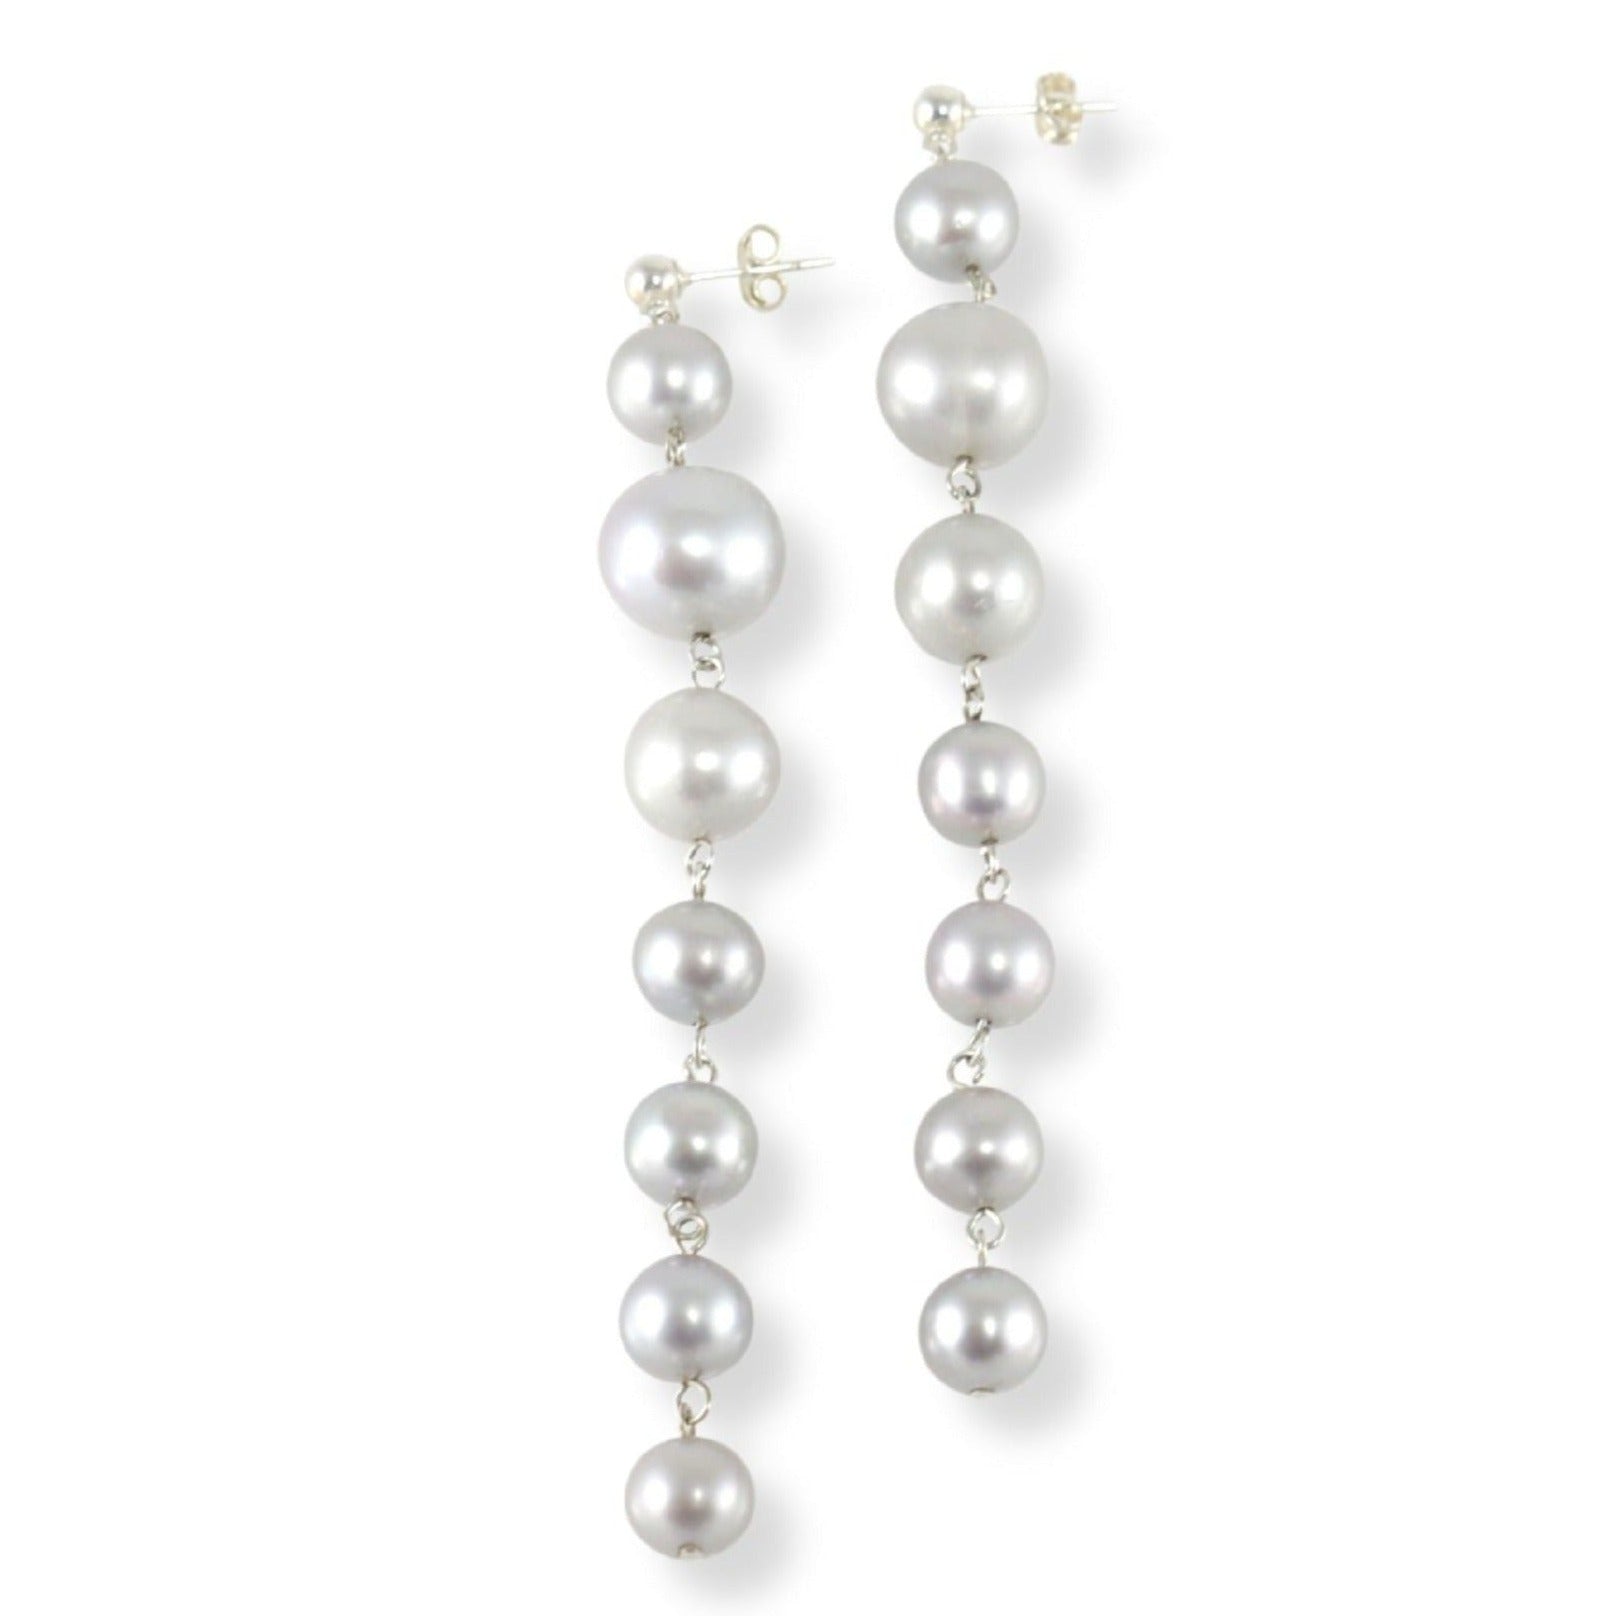 Grey Freshwater pearl dangle earrings with sterling silver. Made with 7 pearls, 3 different sizes, in one vertical row. 